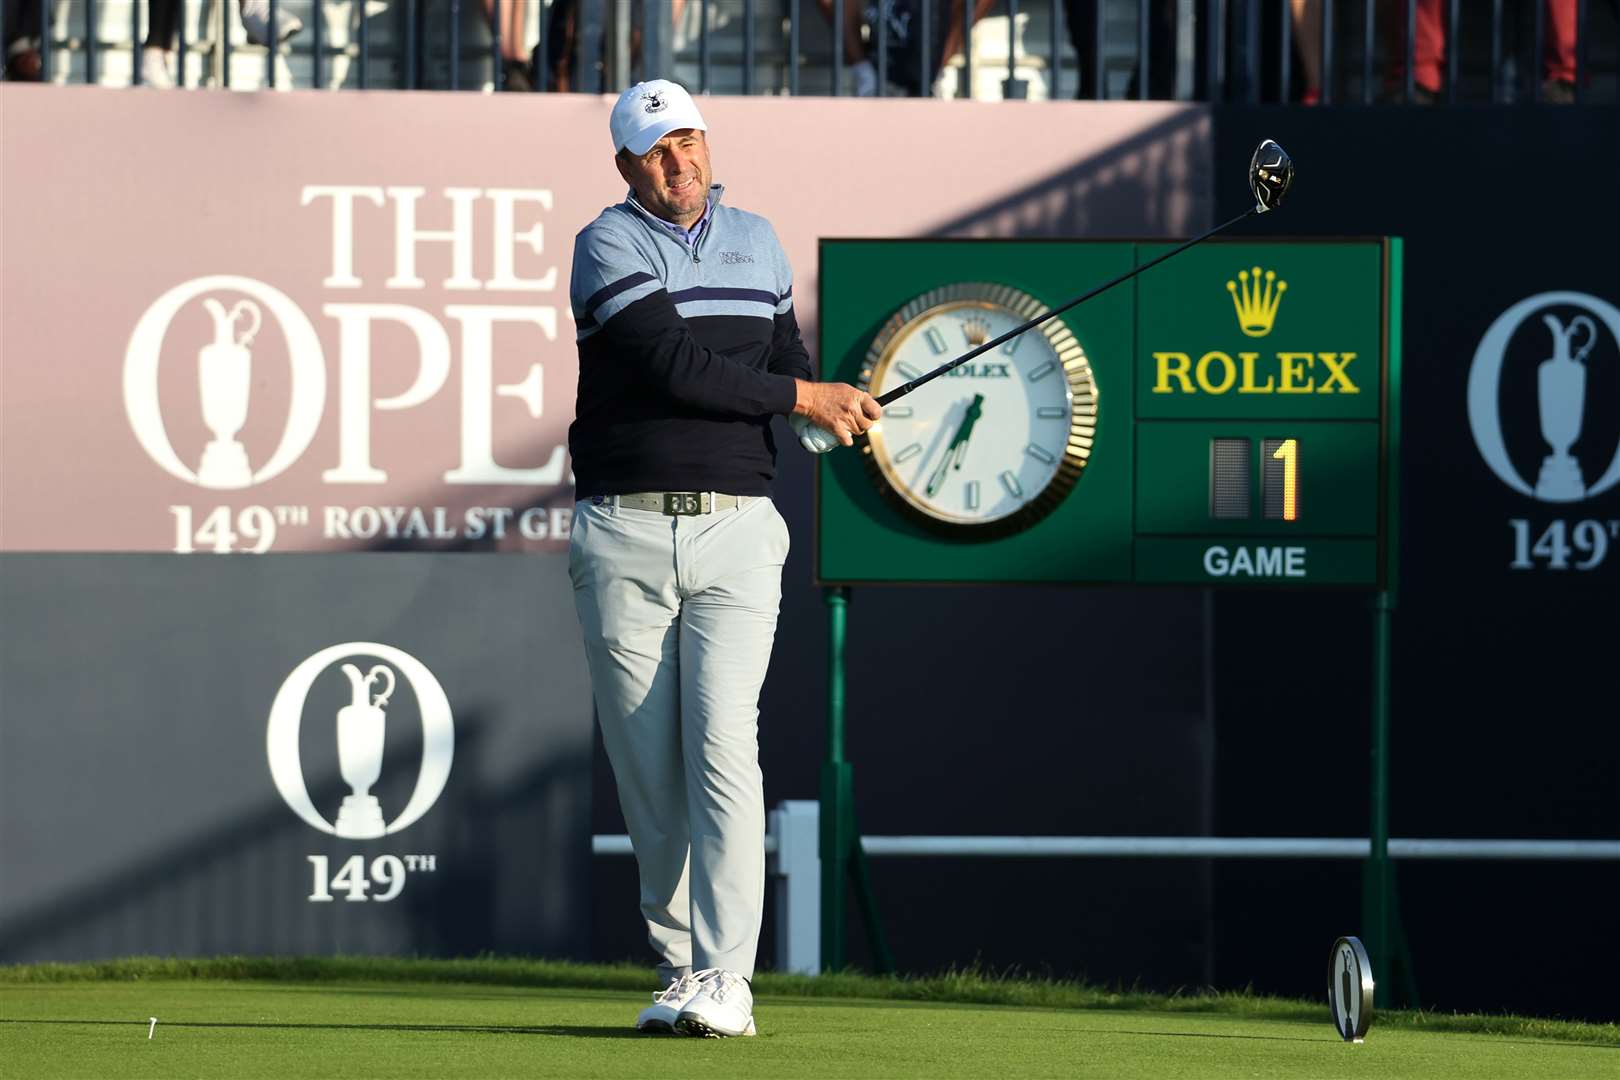 England's Richard Bland tees off on the first hole at Royal St George’s in the 149th Open. Picture: The R&A